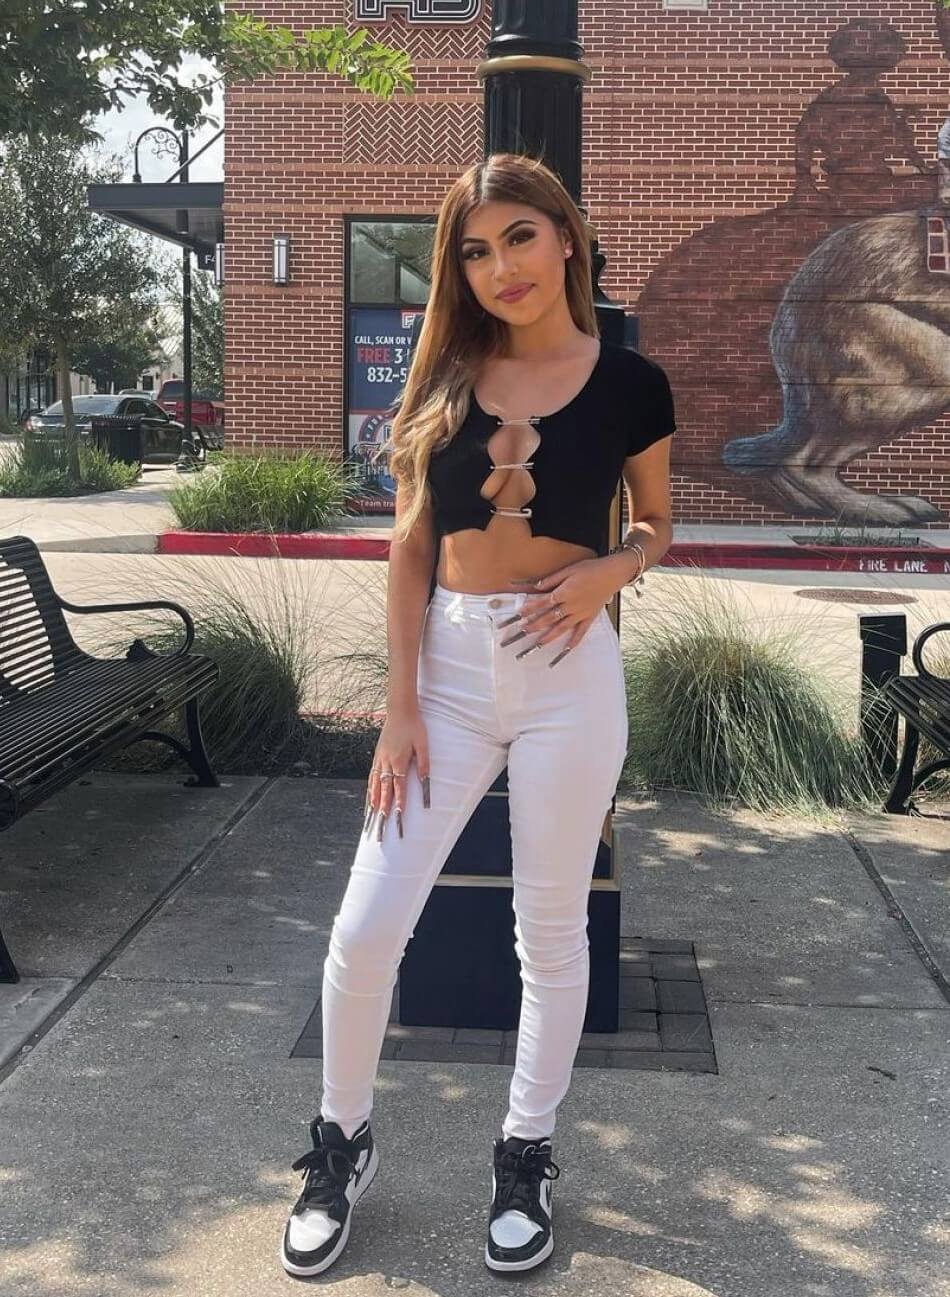 Desiree Montoya In a Black Crop Top With White Jeans